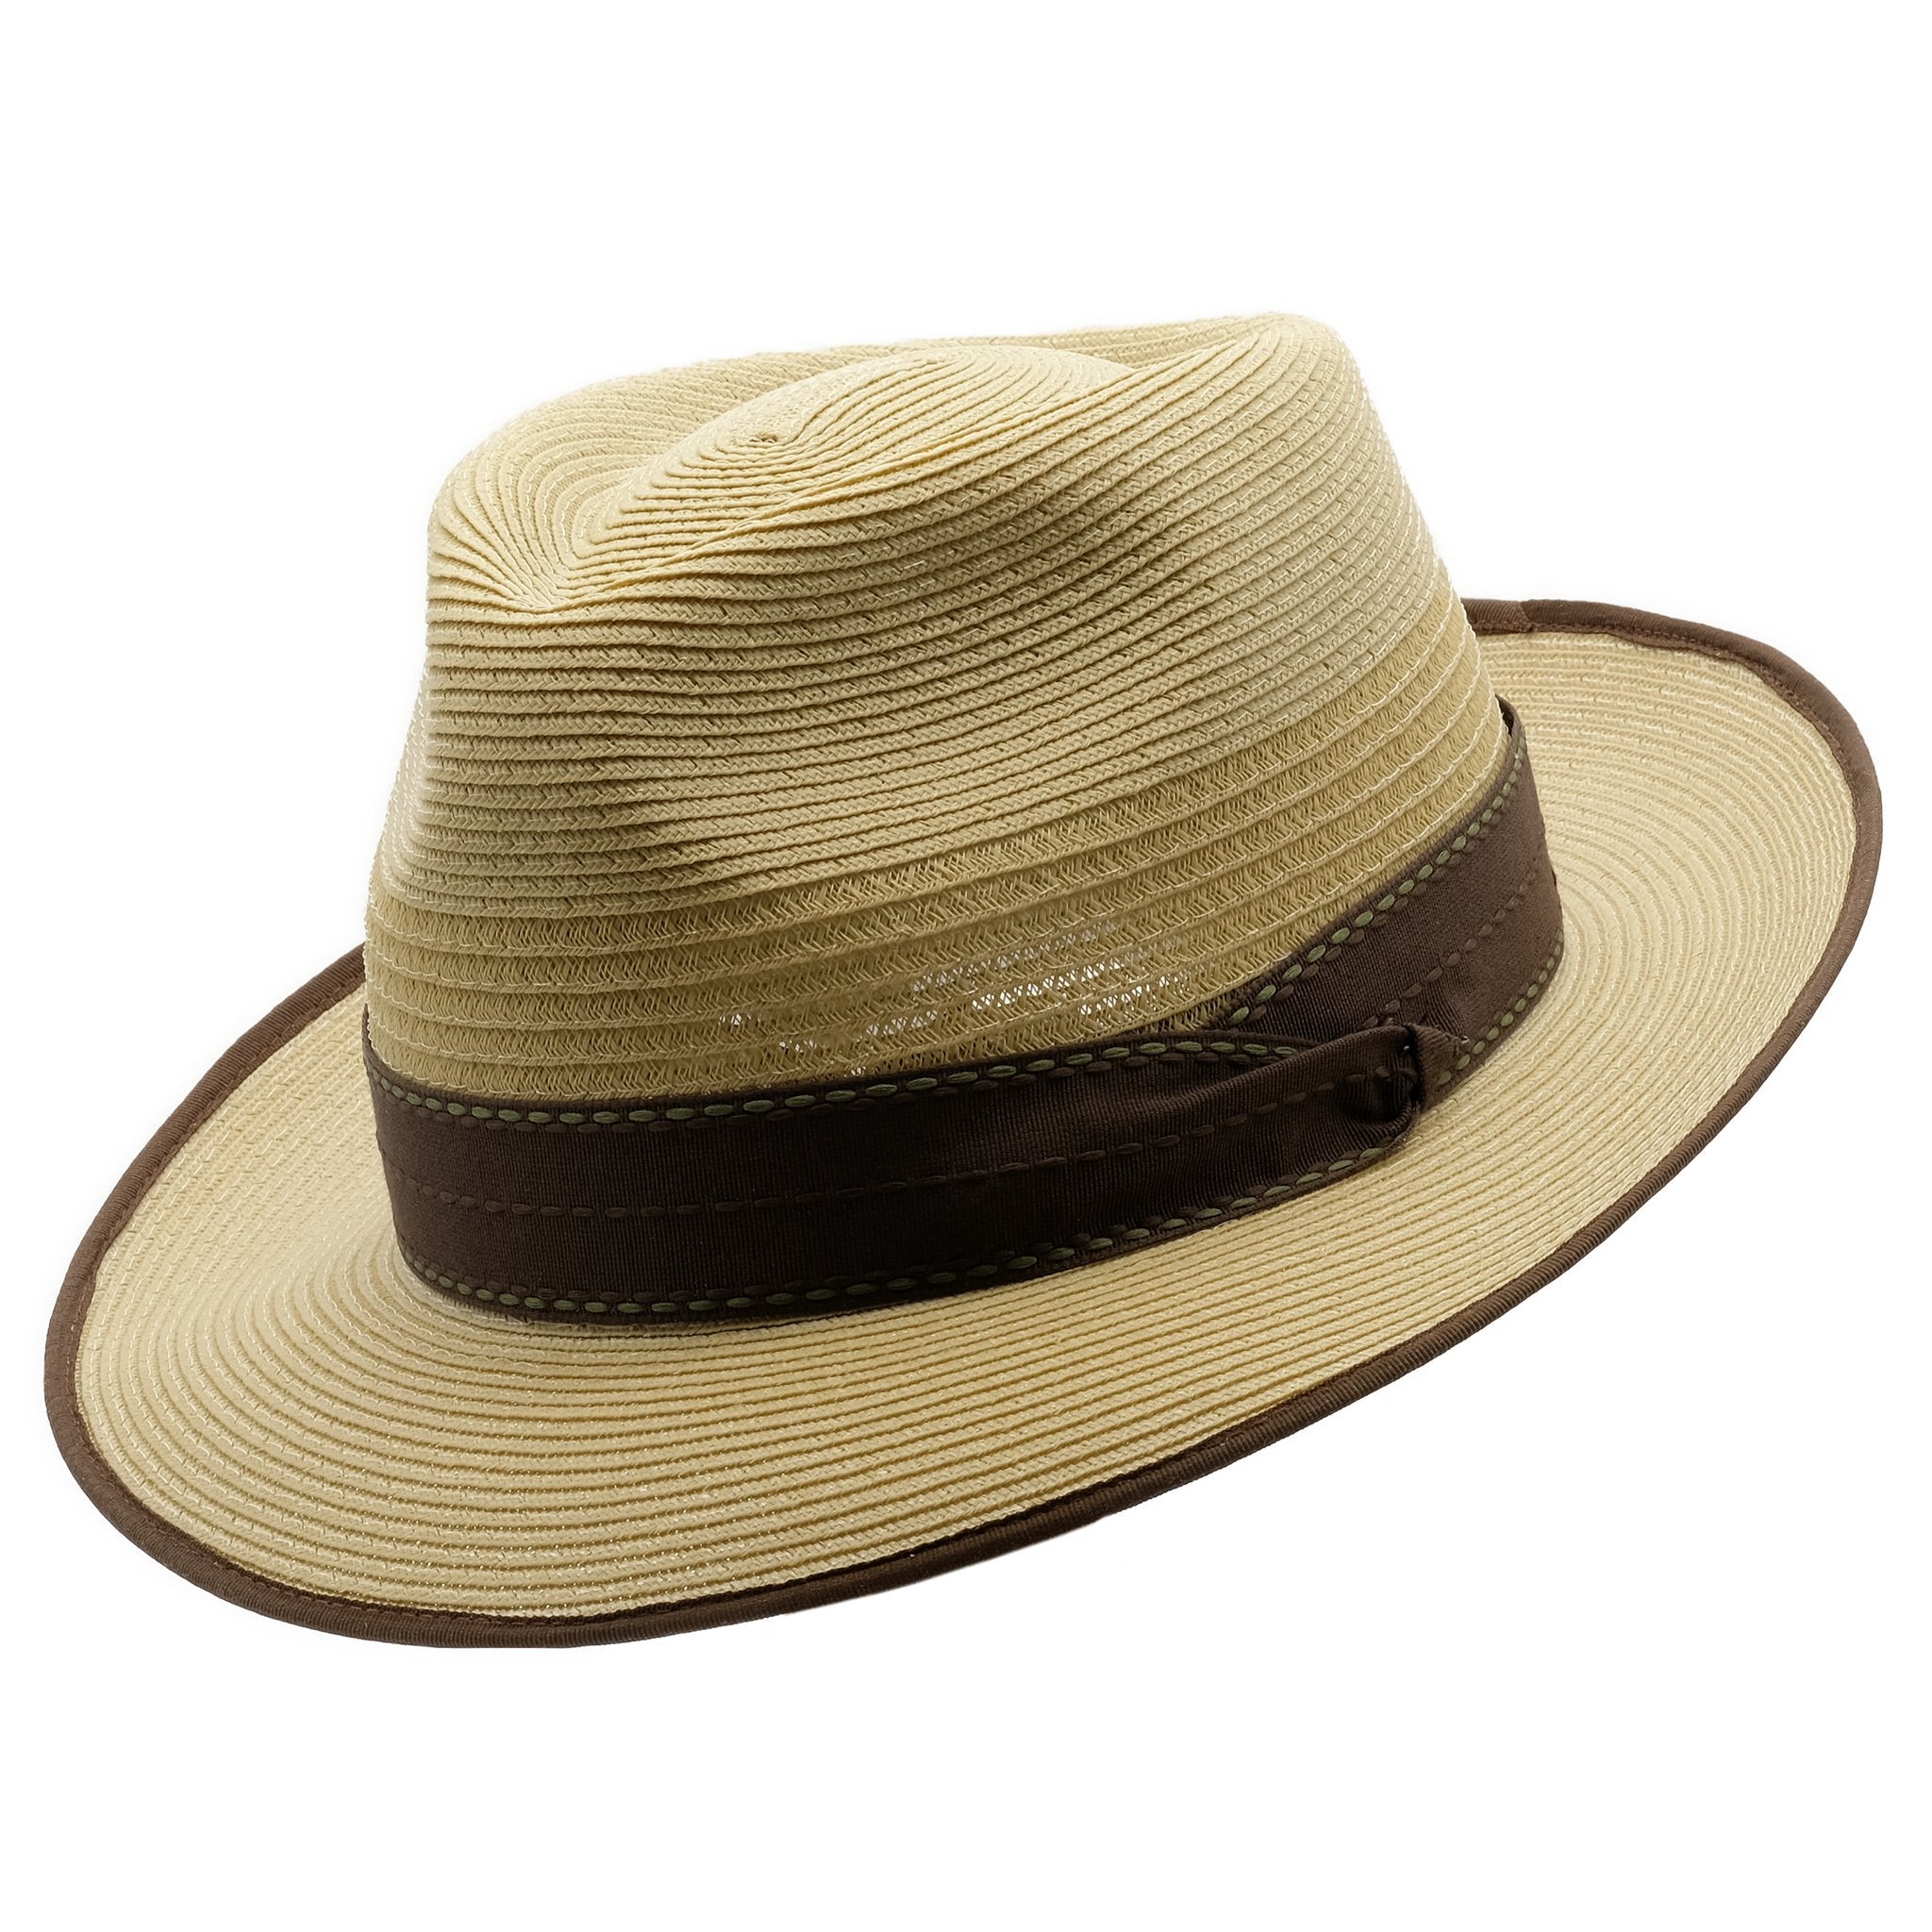 Angle view of Akubra Capricorn hat in Fawn colour